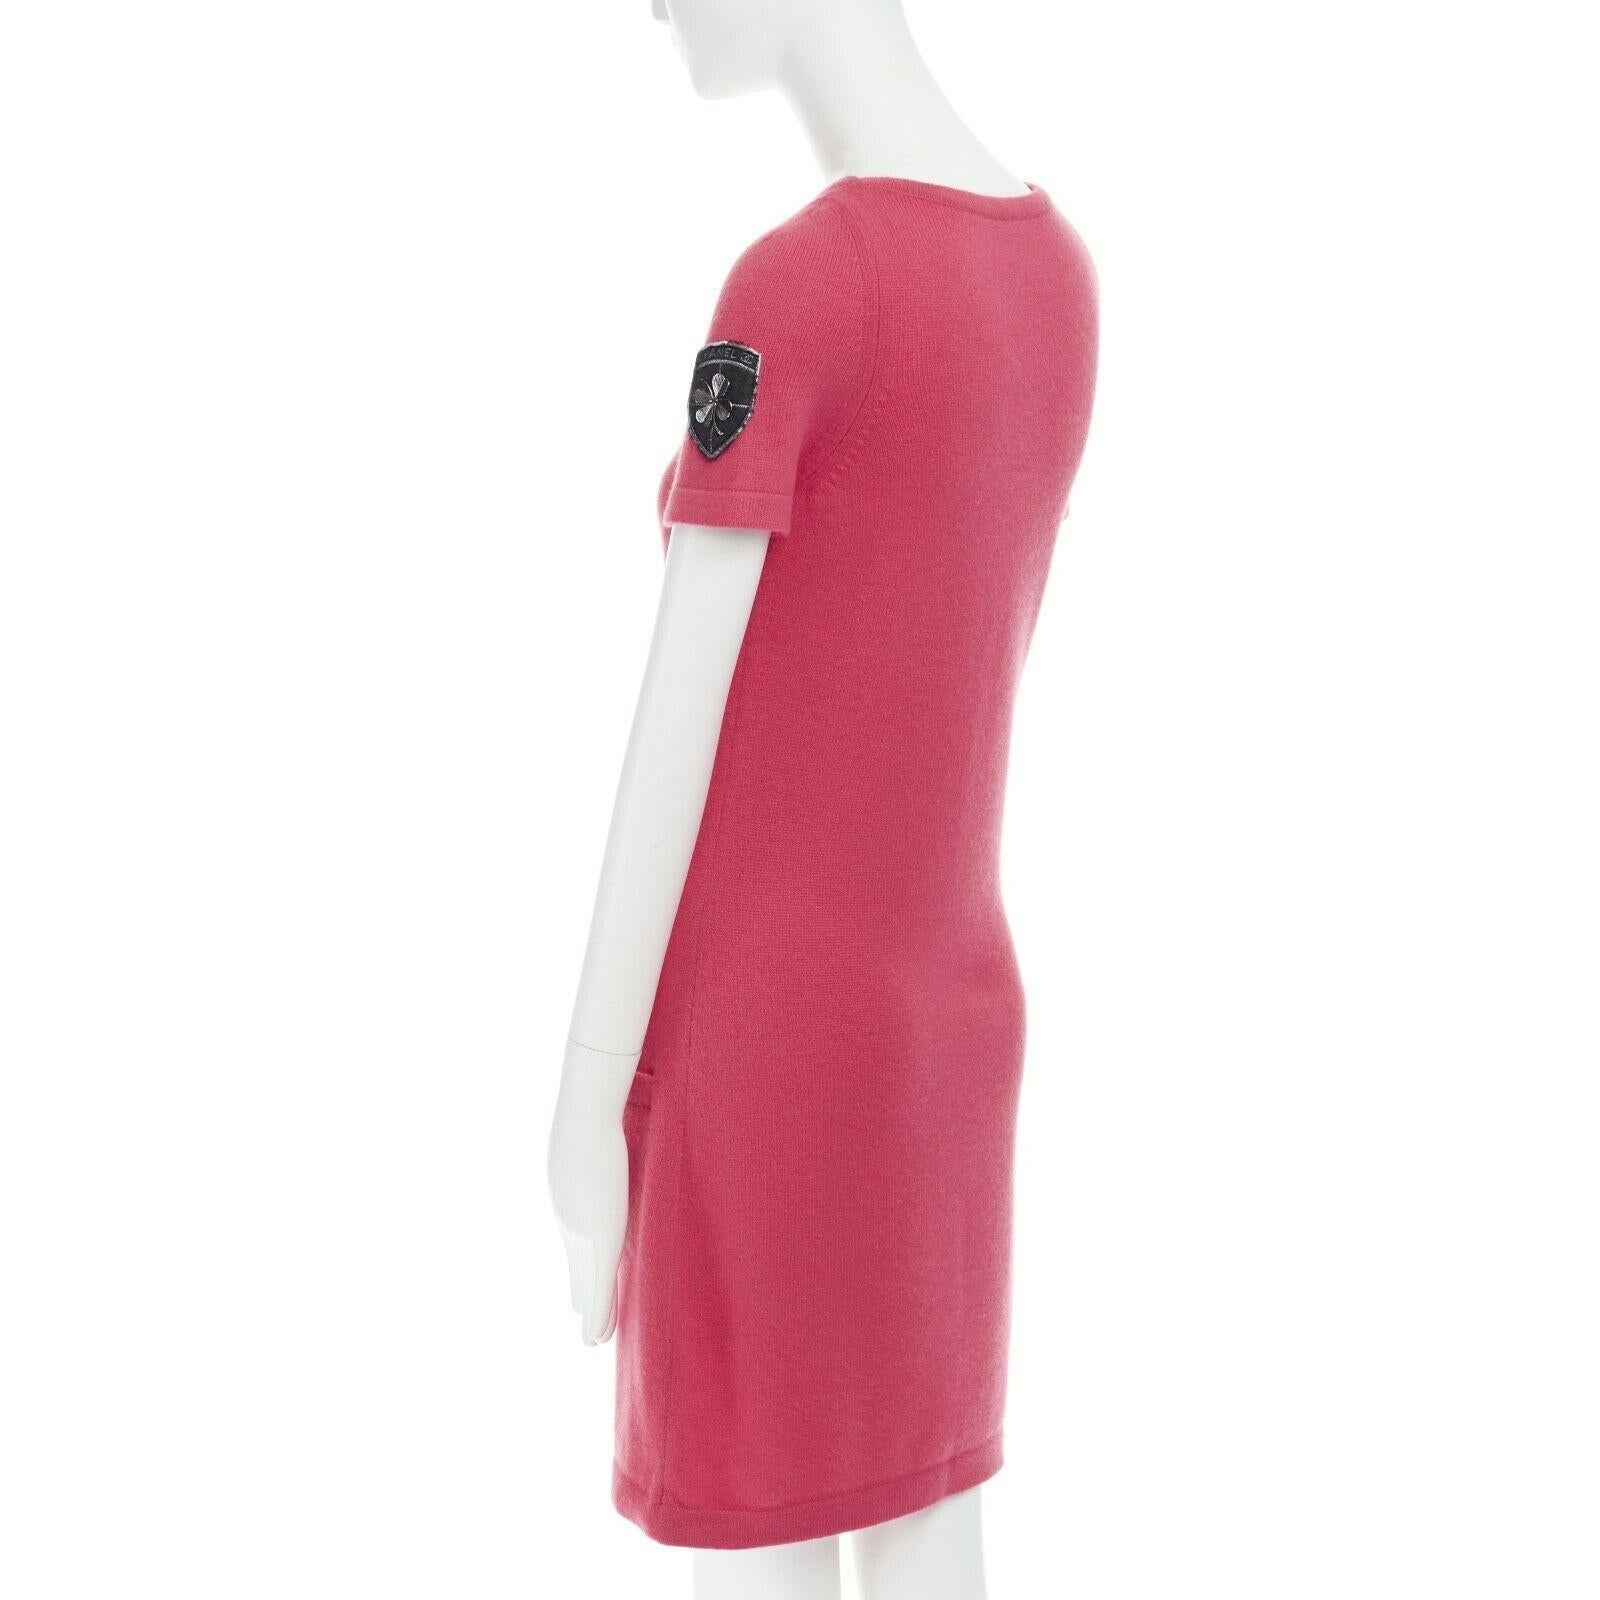 CHANEL 09A 100% cashmere pink dual CC button pocket patched sleeve dress FR36 S 2